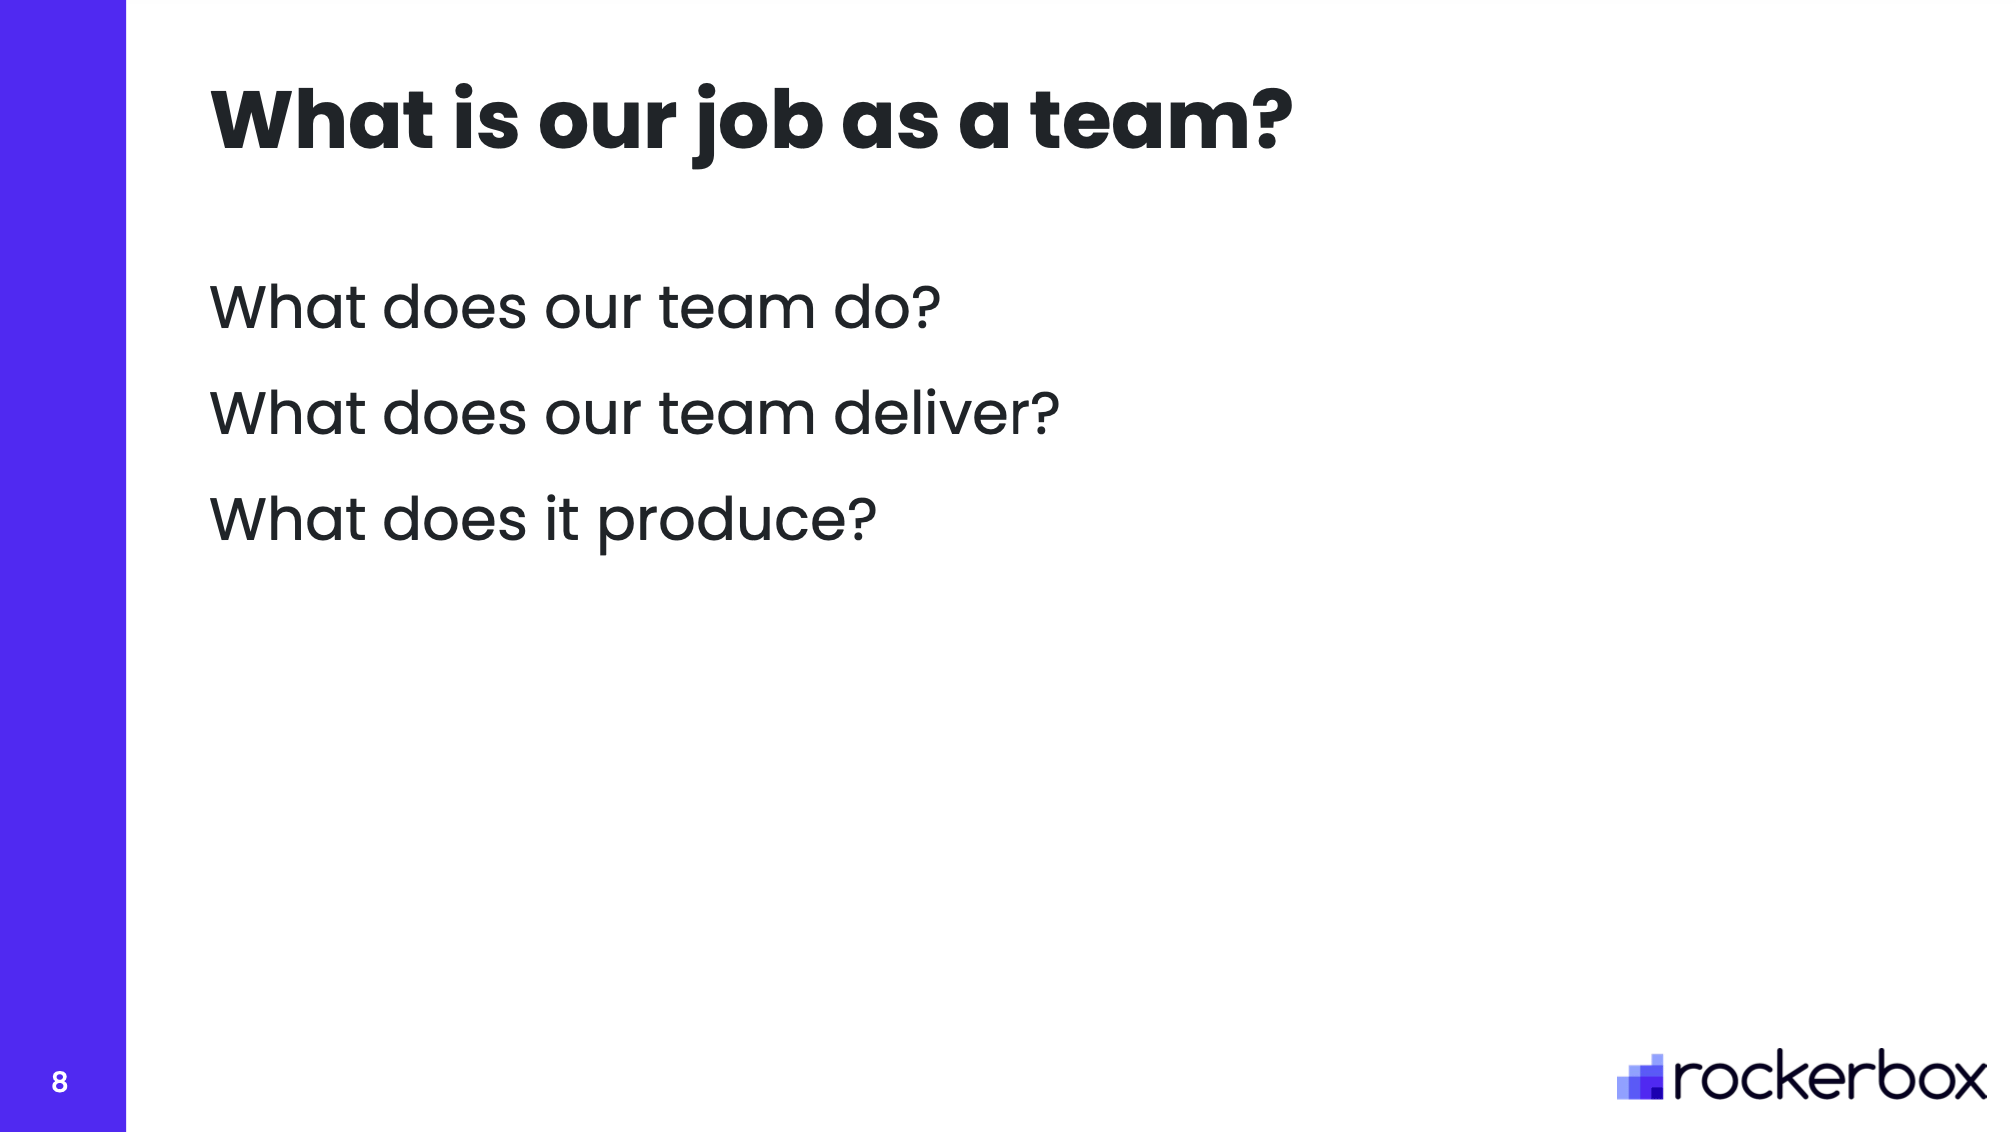 What is our job as a team